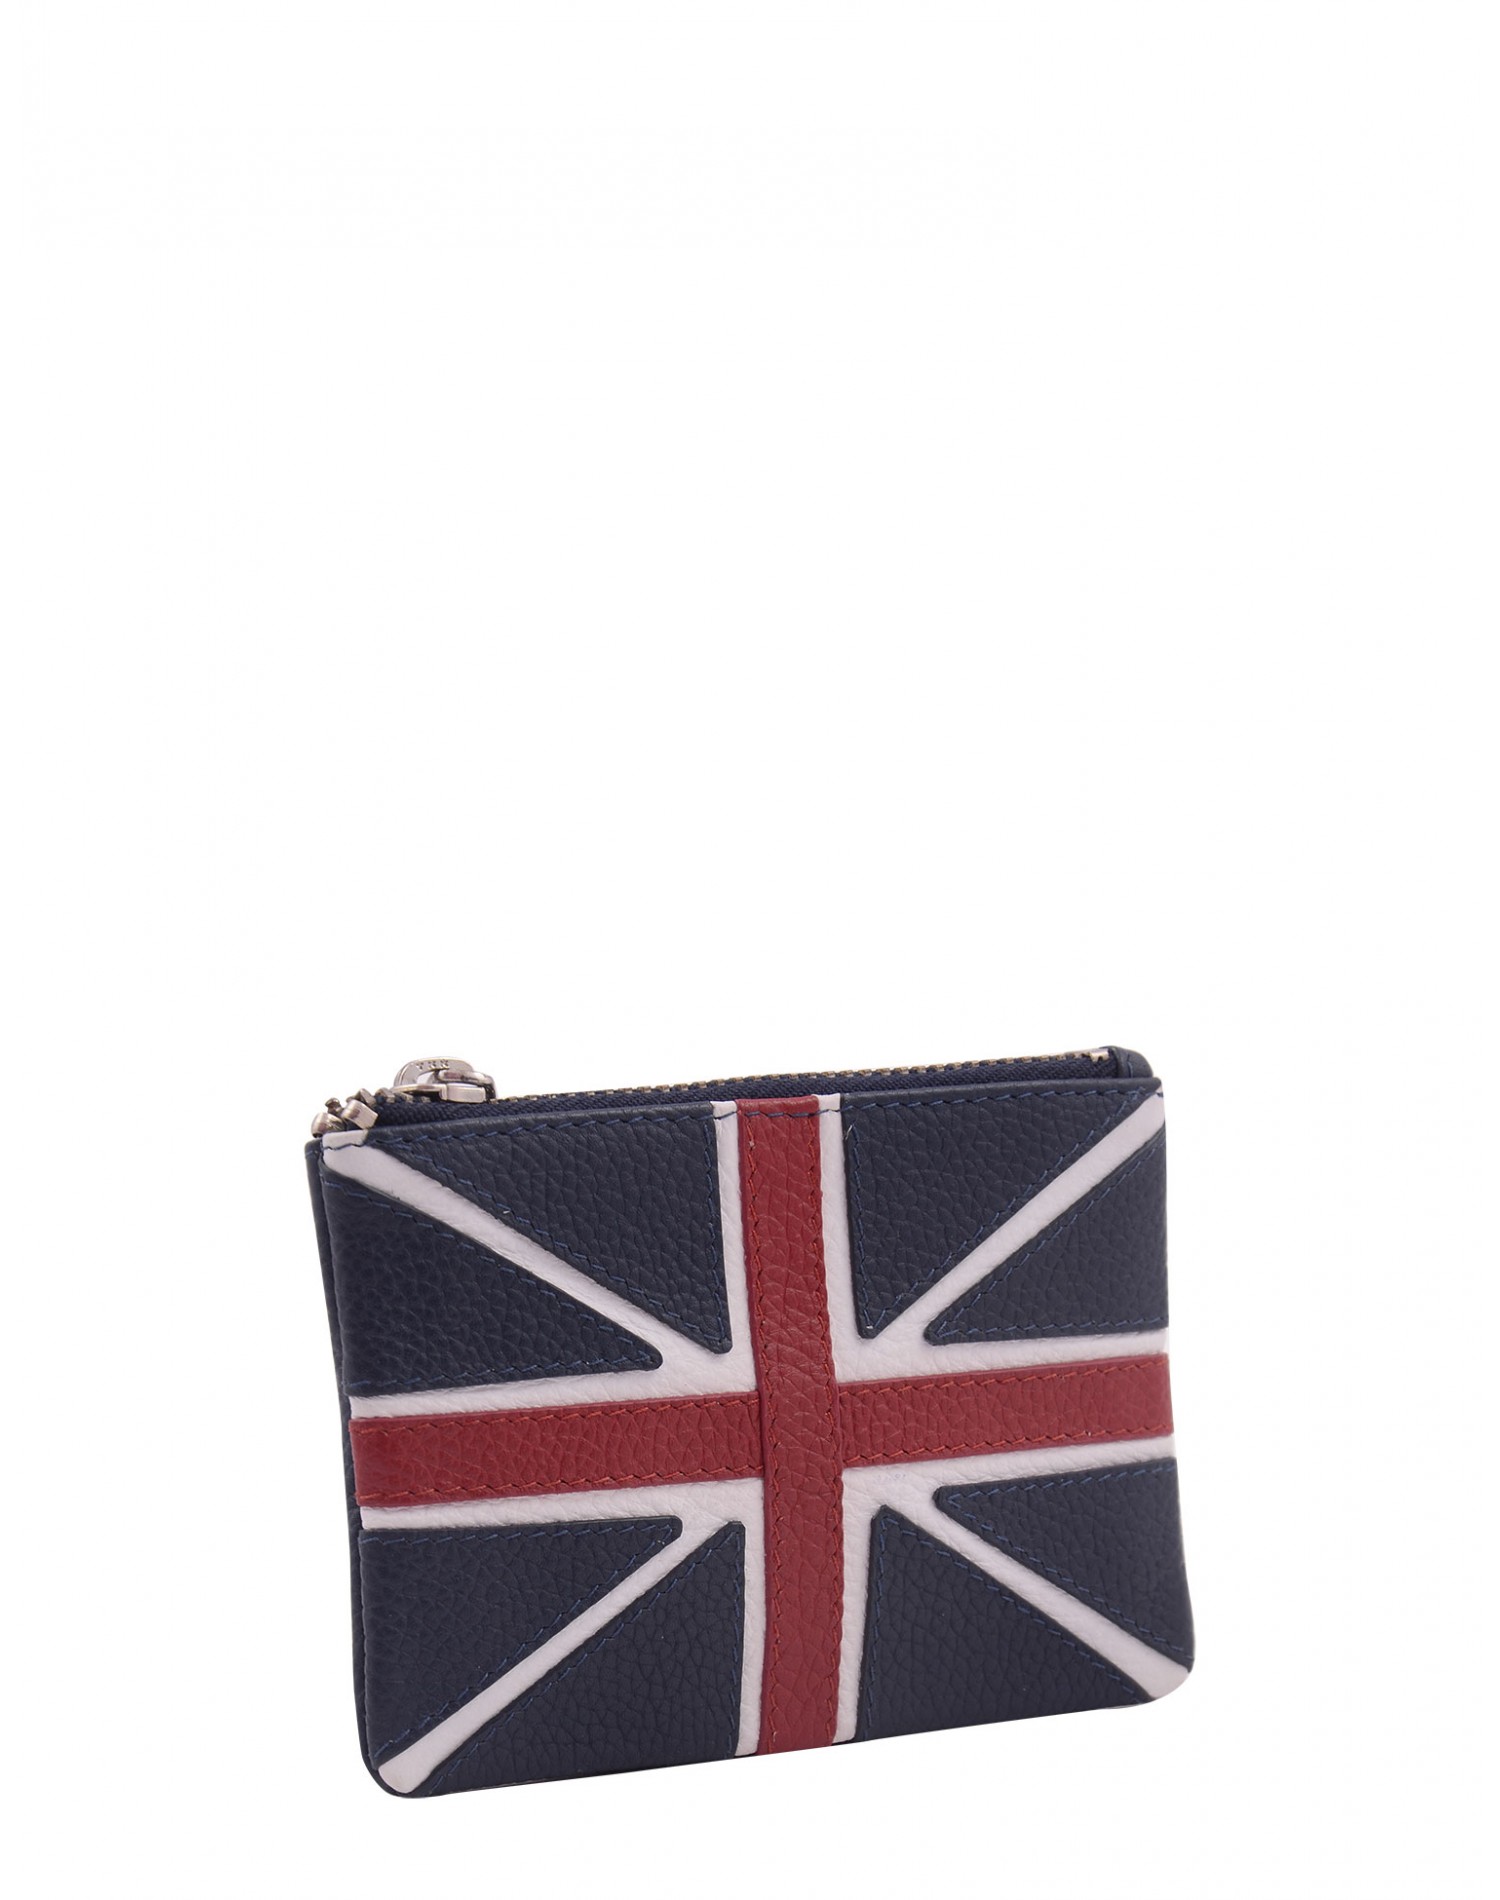 Buy Accessorize London Reptile And Resin Coin Purse Online